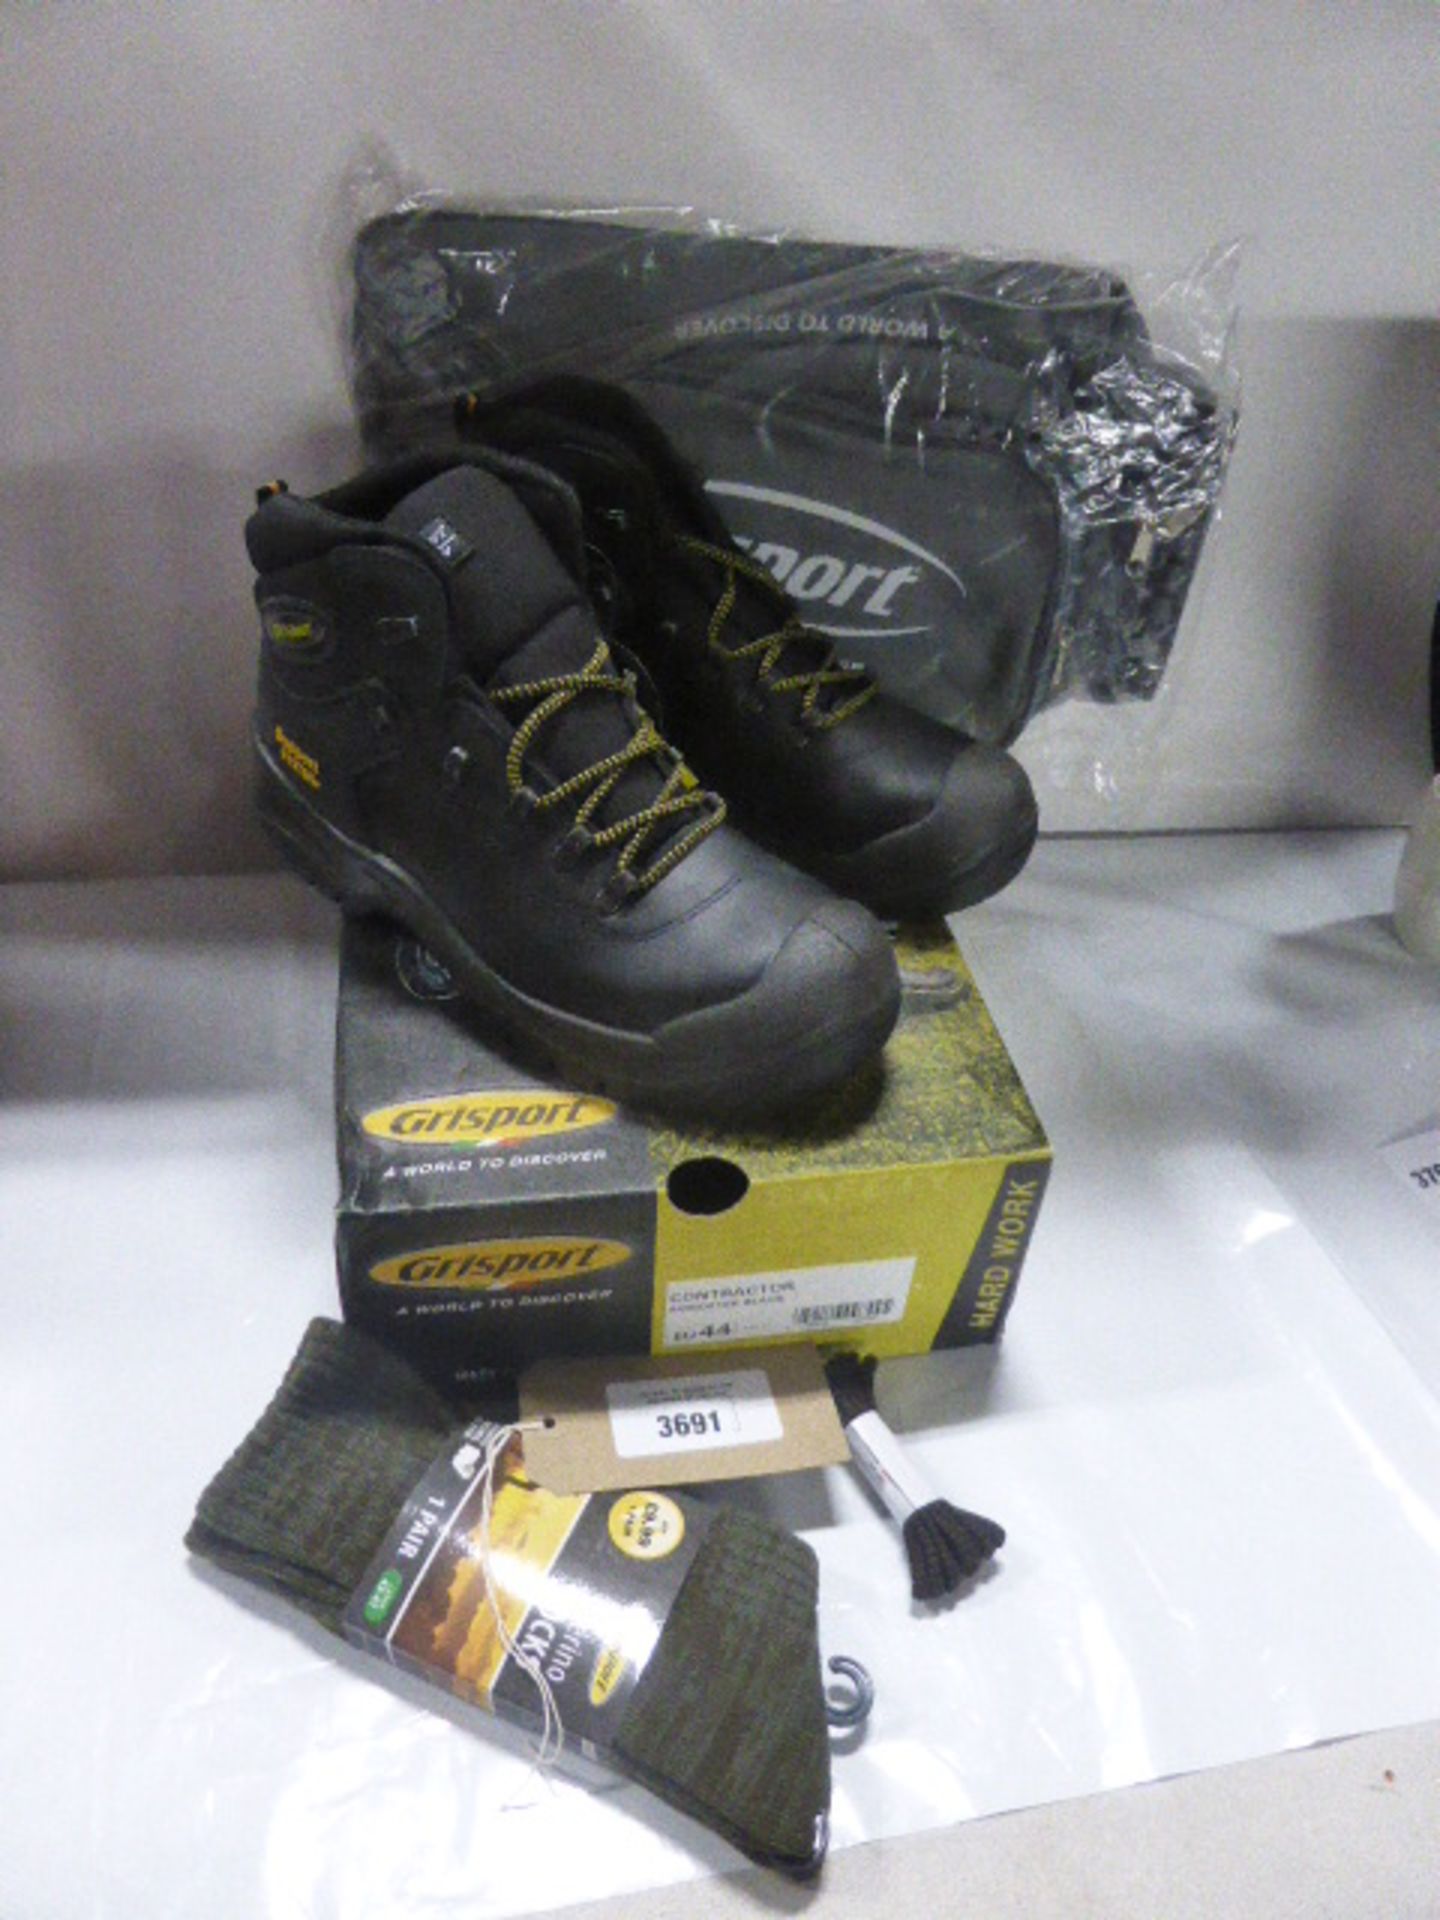 Grisport Contractor Black Steel Toe Cap Boots Size EU44 with Socks, Spare Laces and Bag